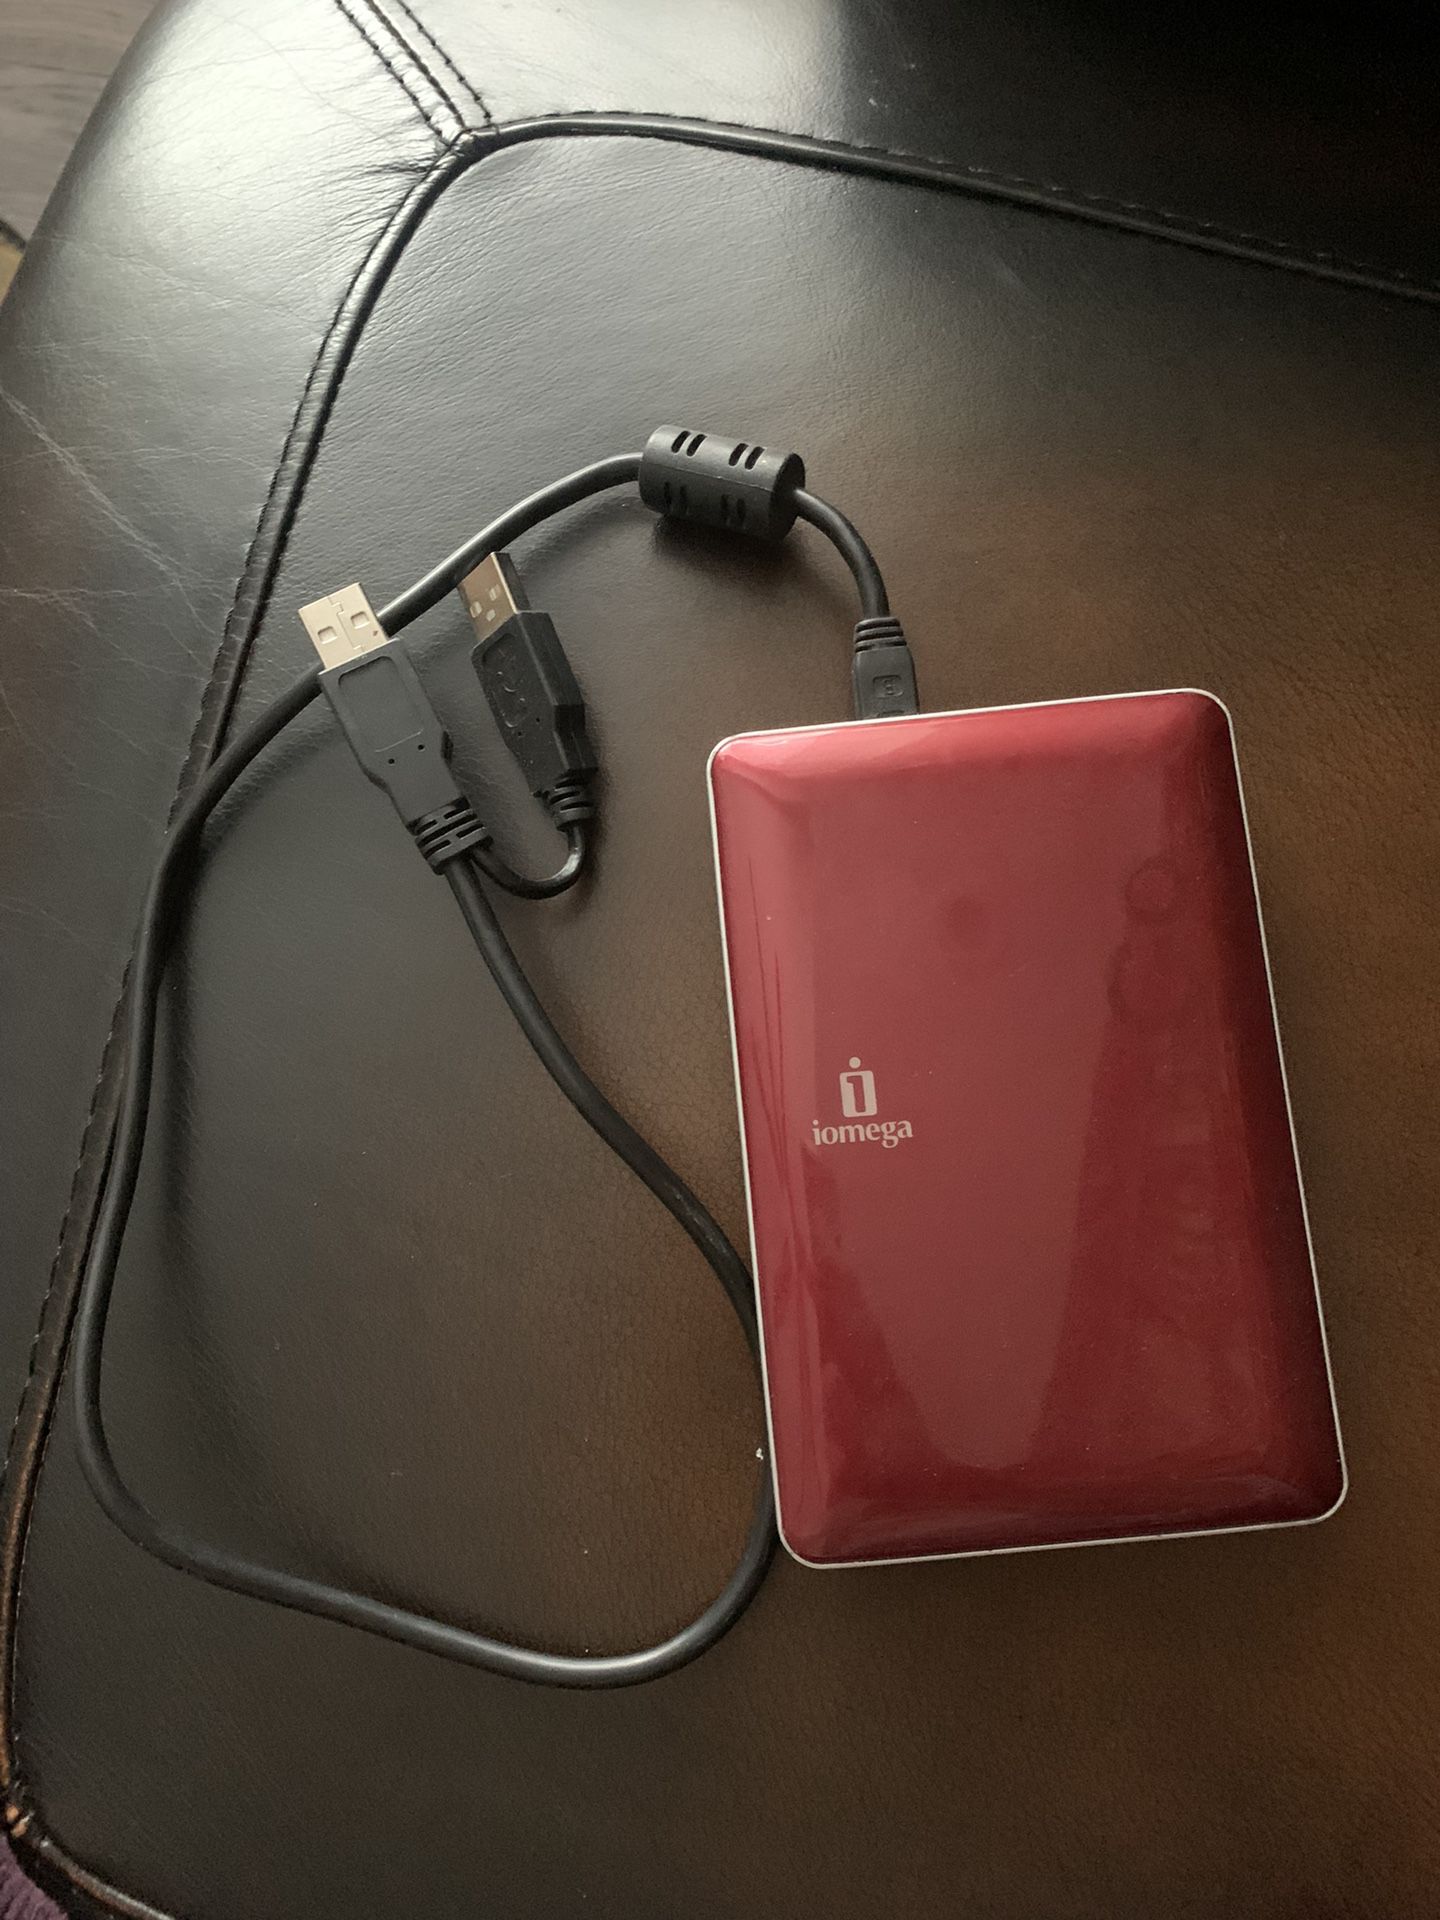 Iomega Ego 500gb External Hard Drive Red With Cable